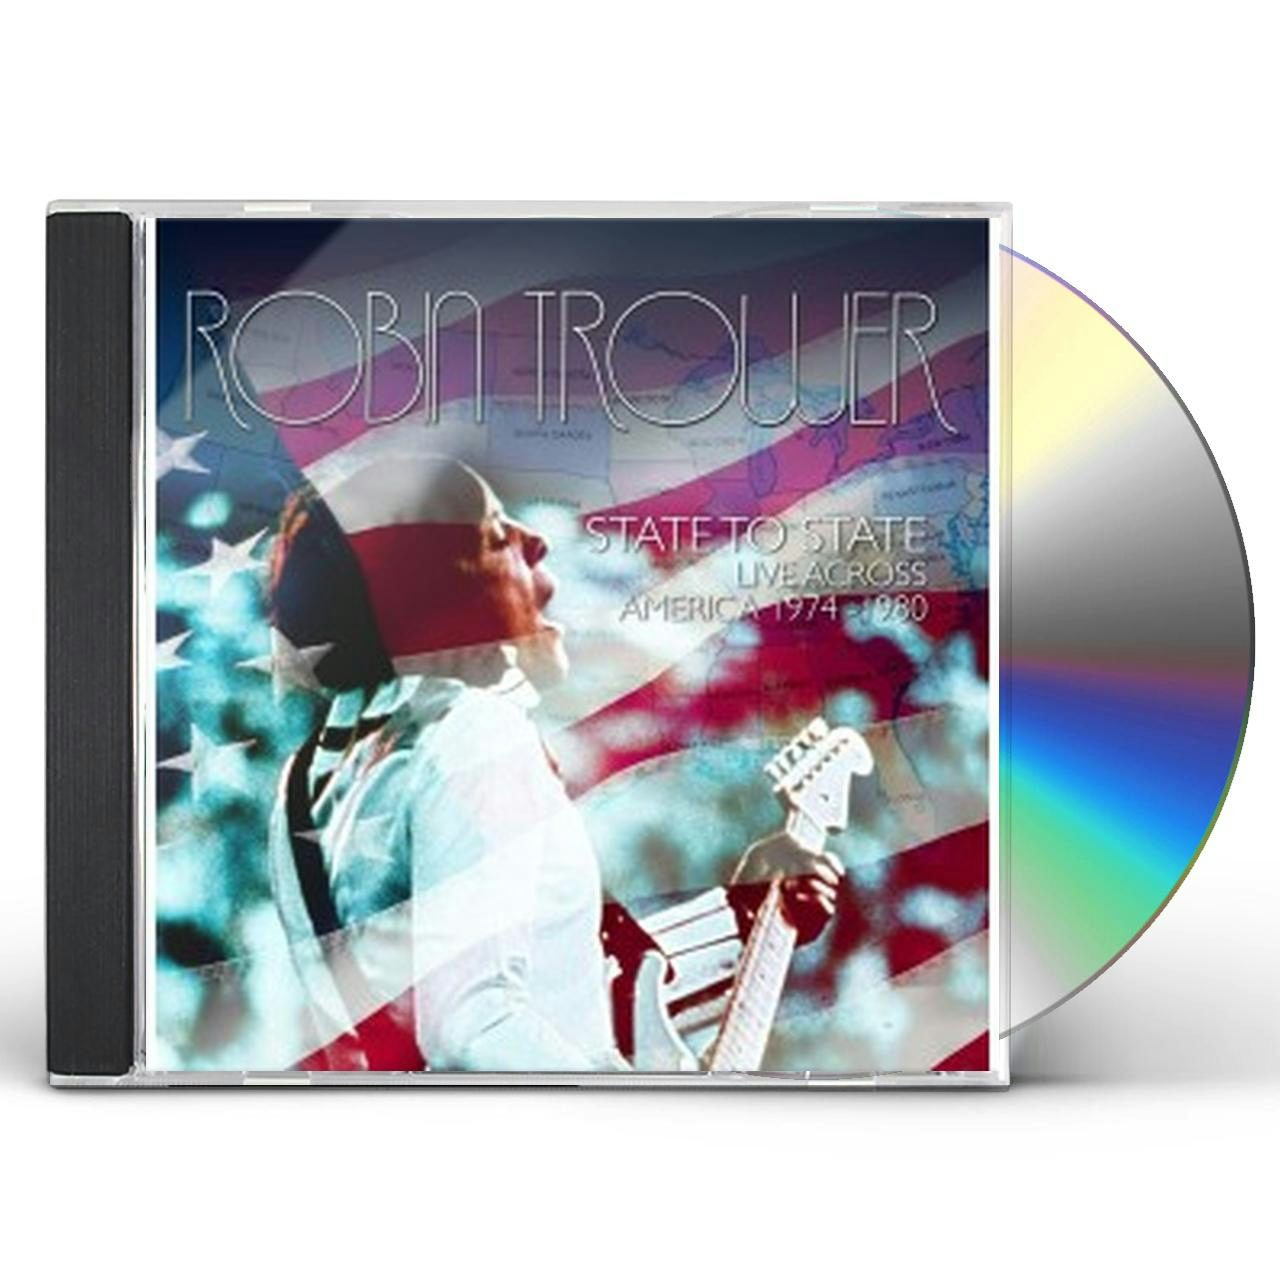 free download robin trower united state of mind